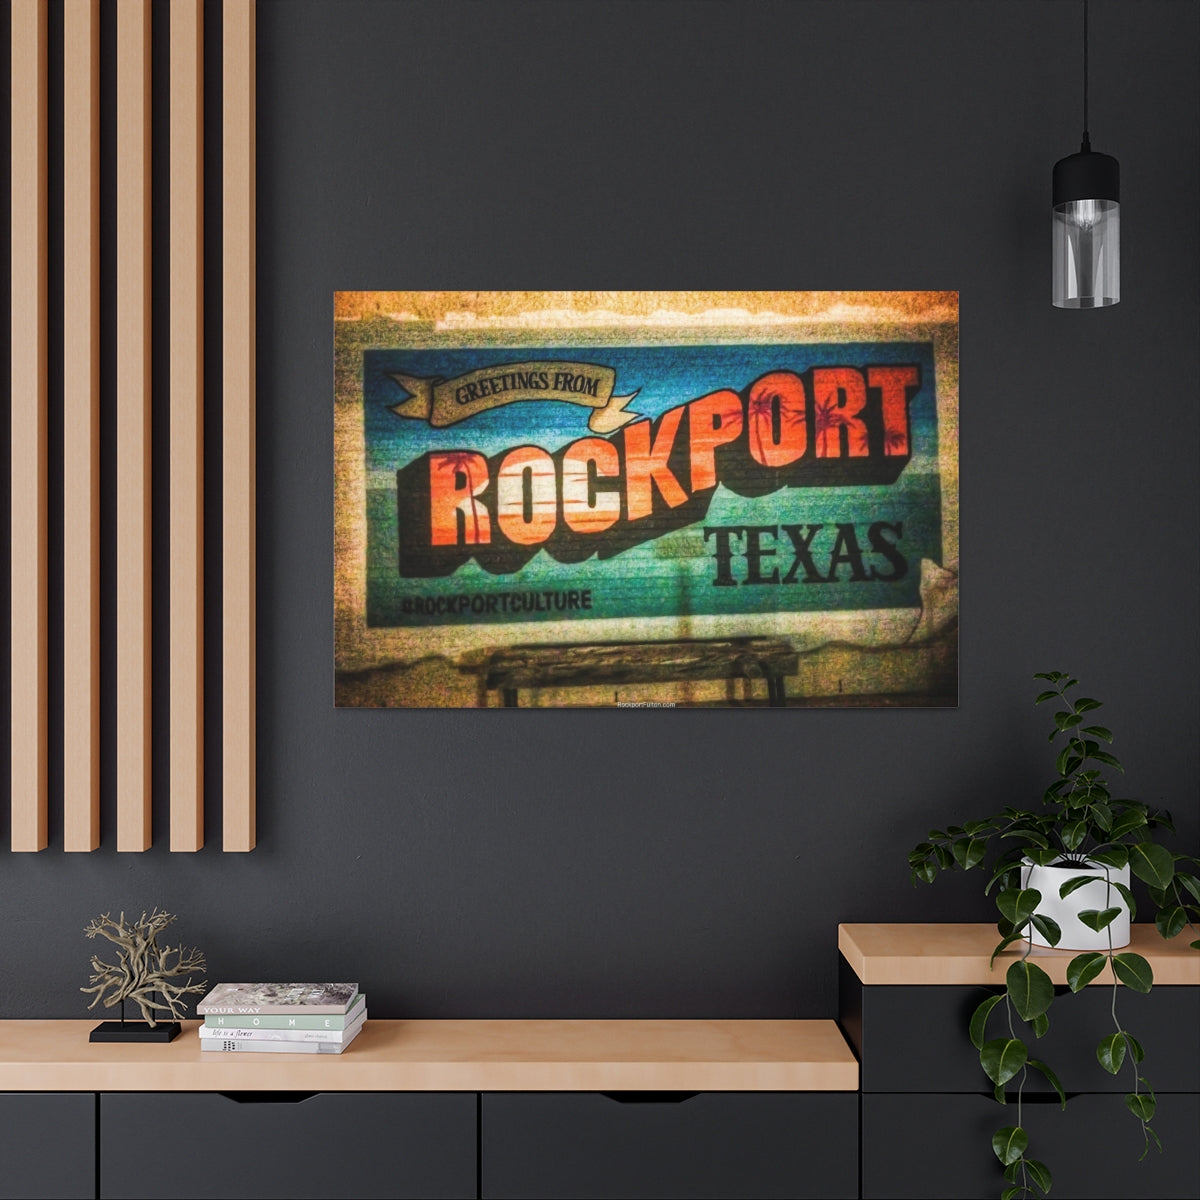 Greetings from Rockport Texas Large Canvas Gallery Wrap